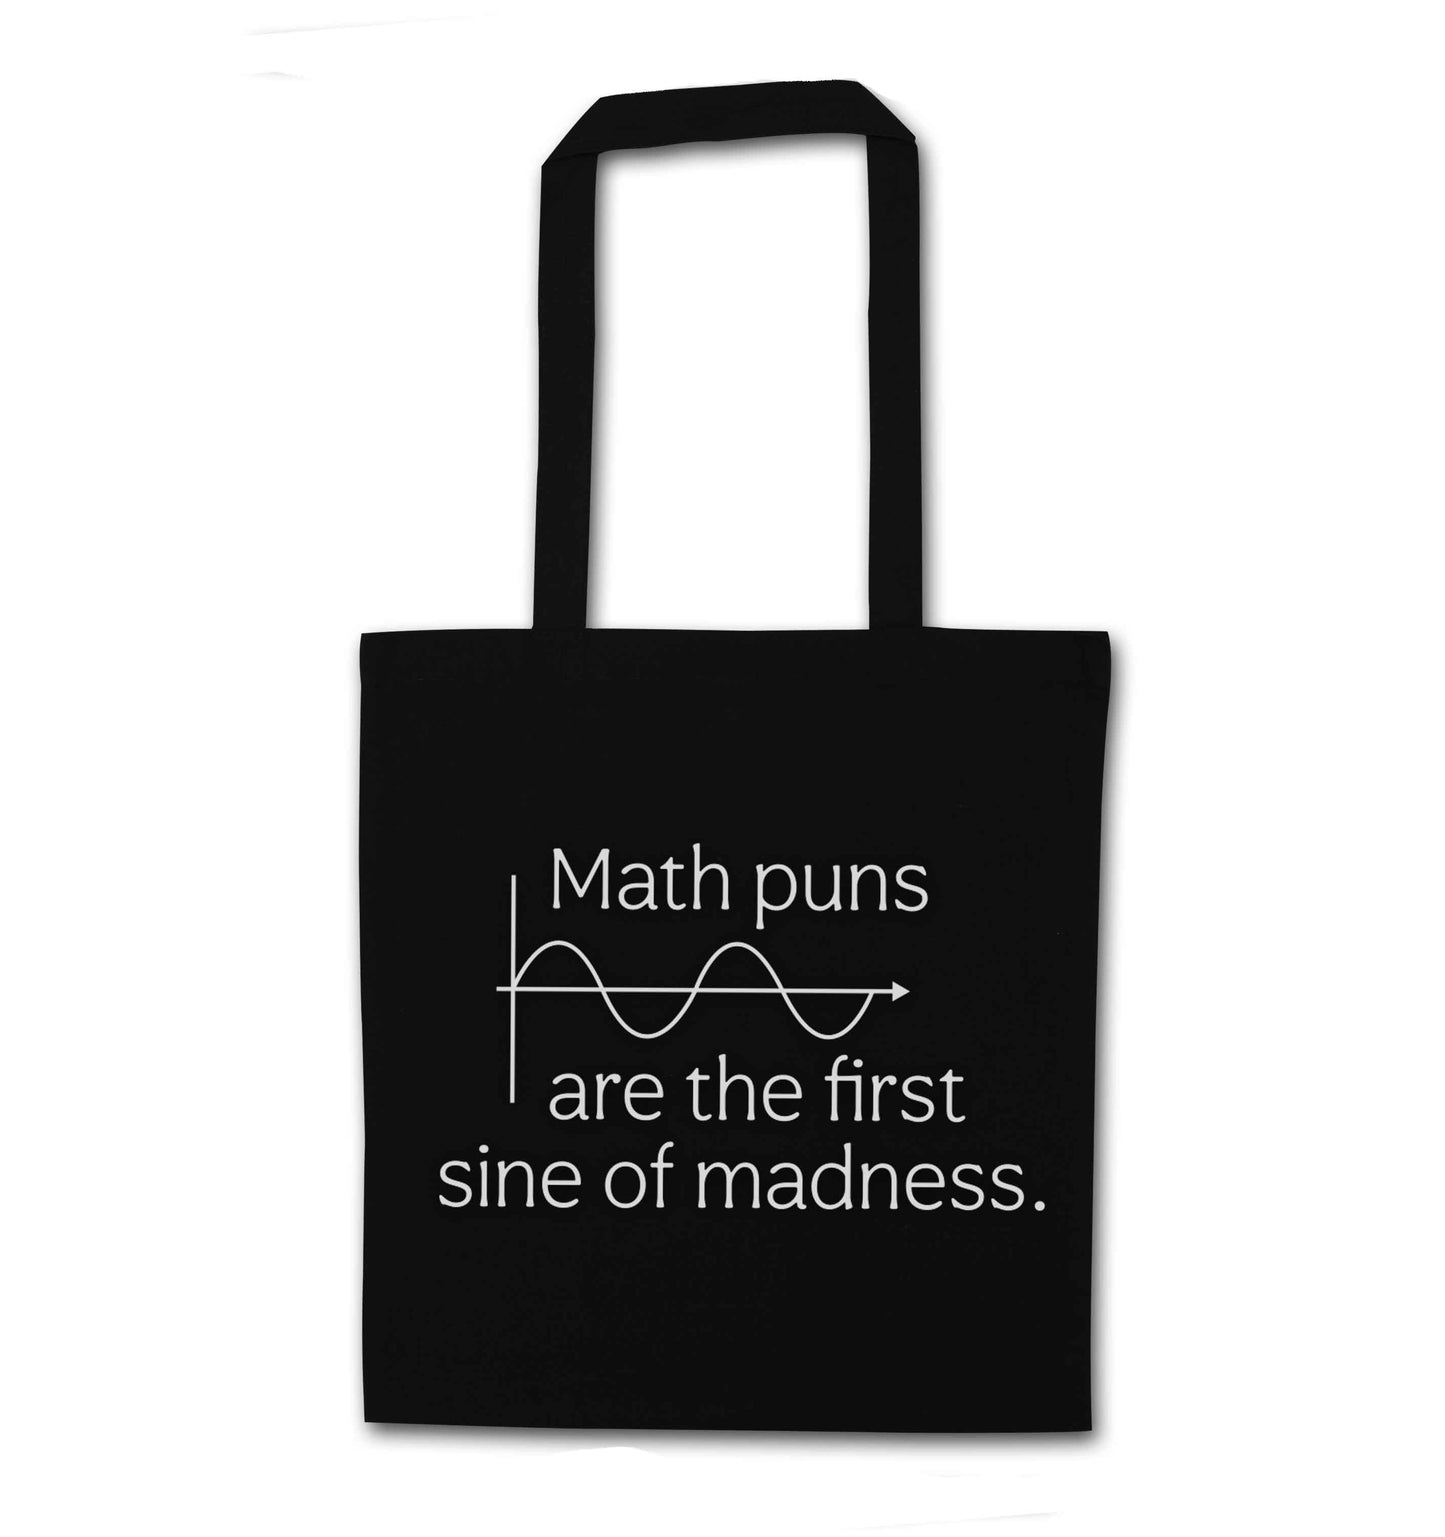 Math puns are the first sine of madness black tote bag